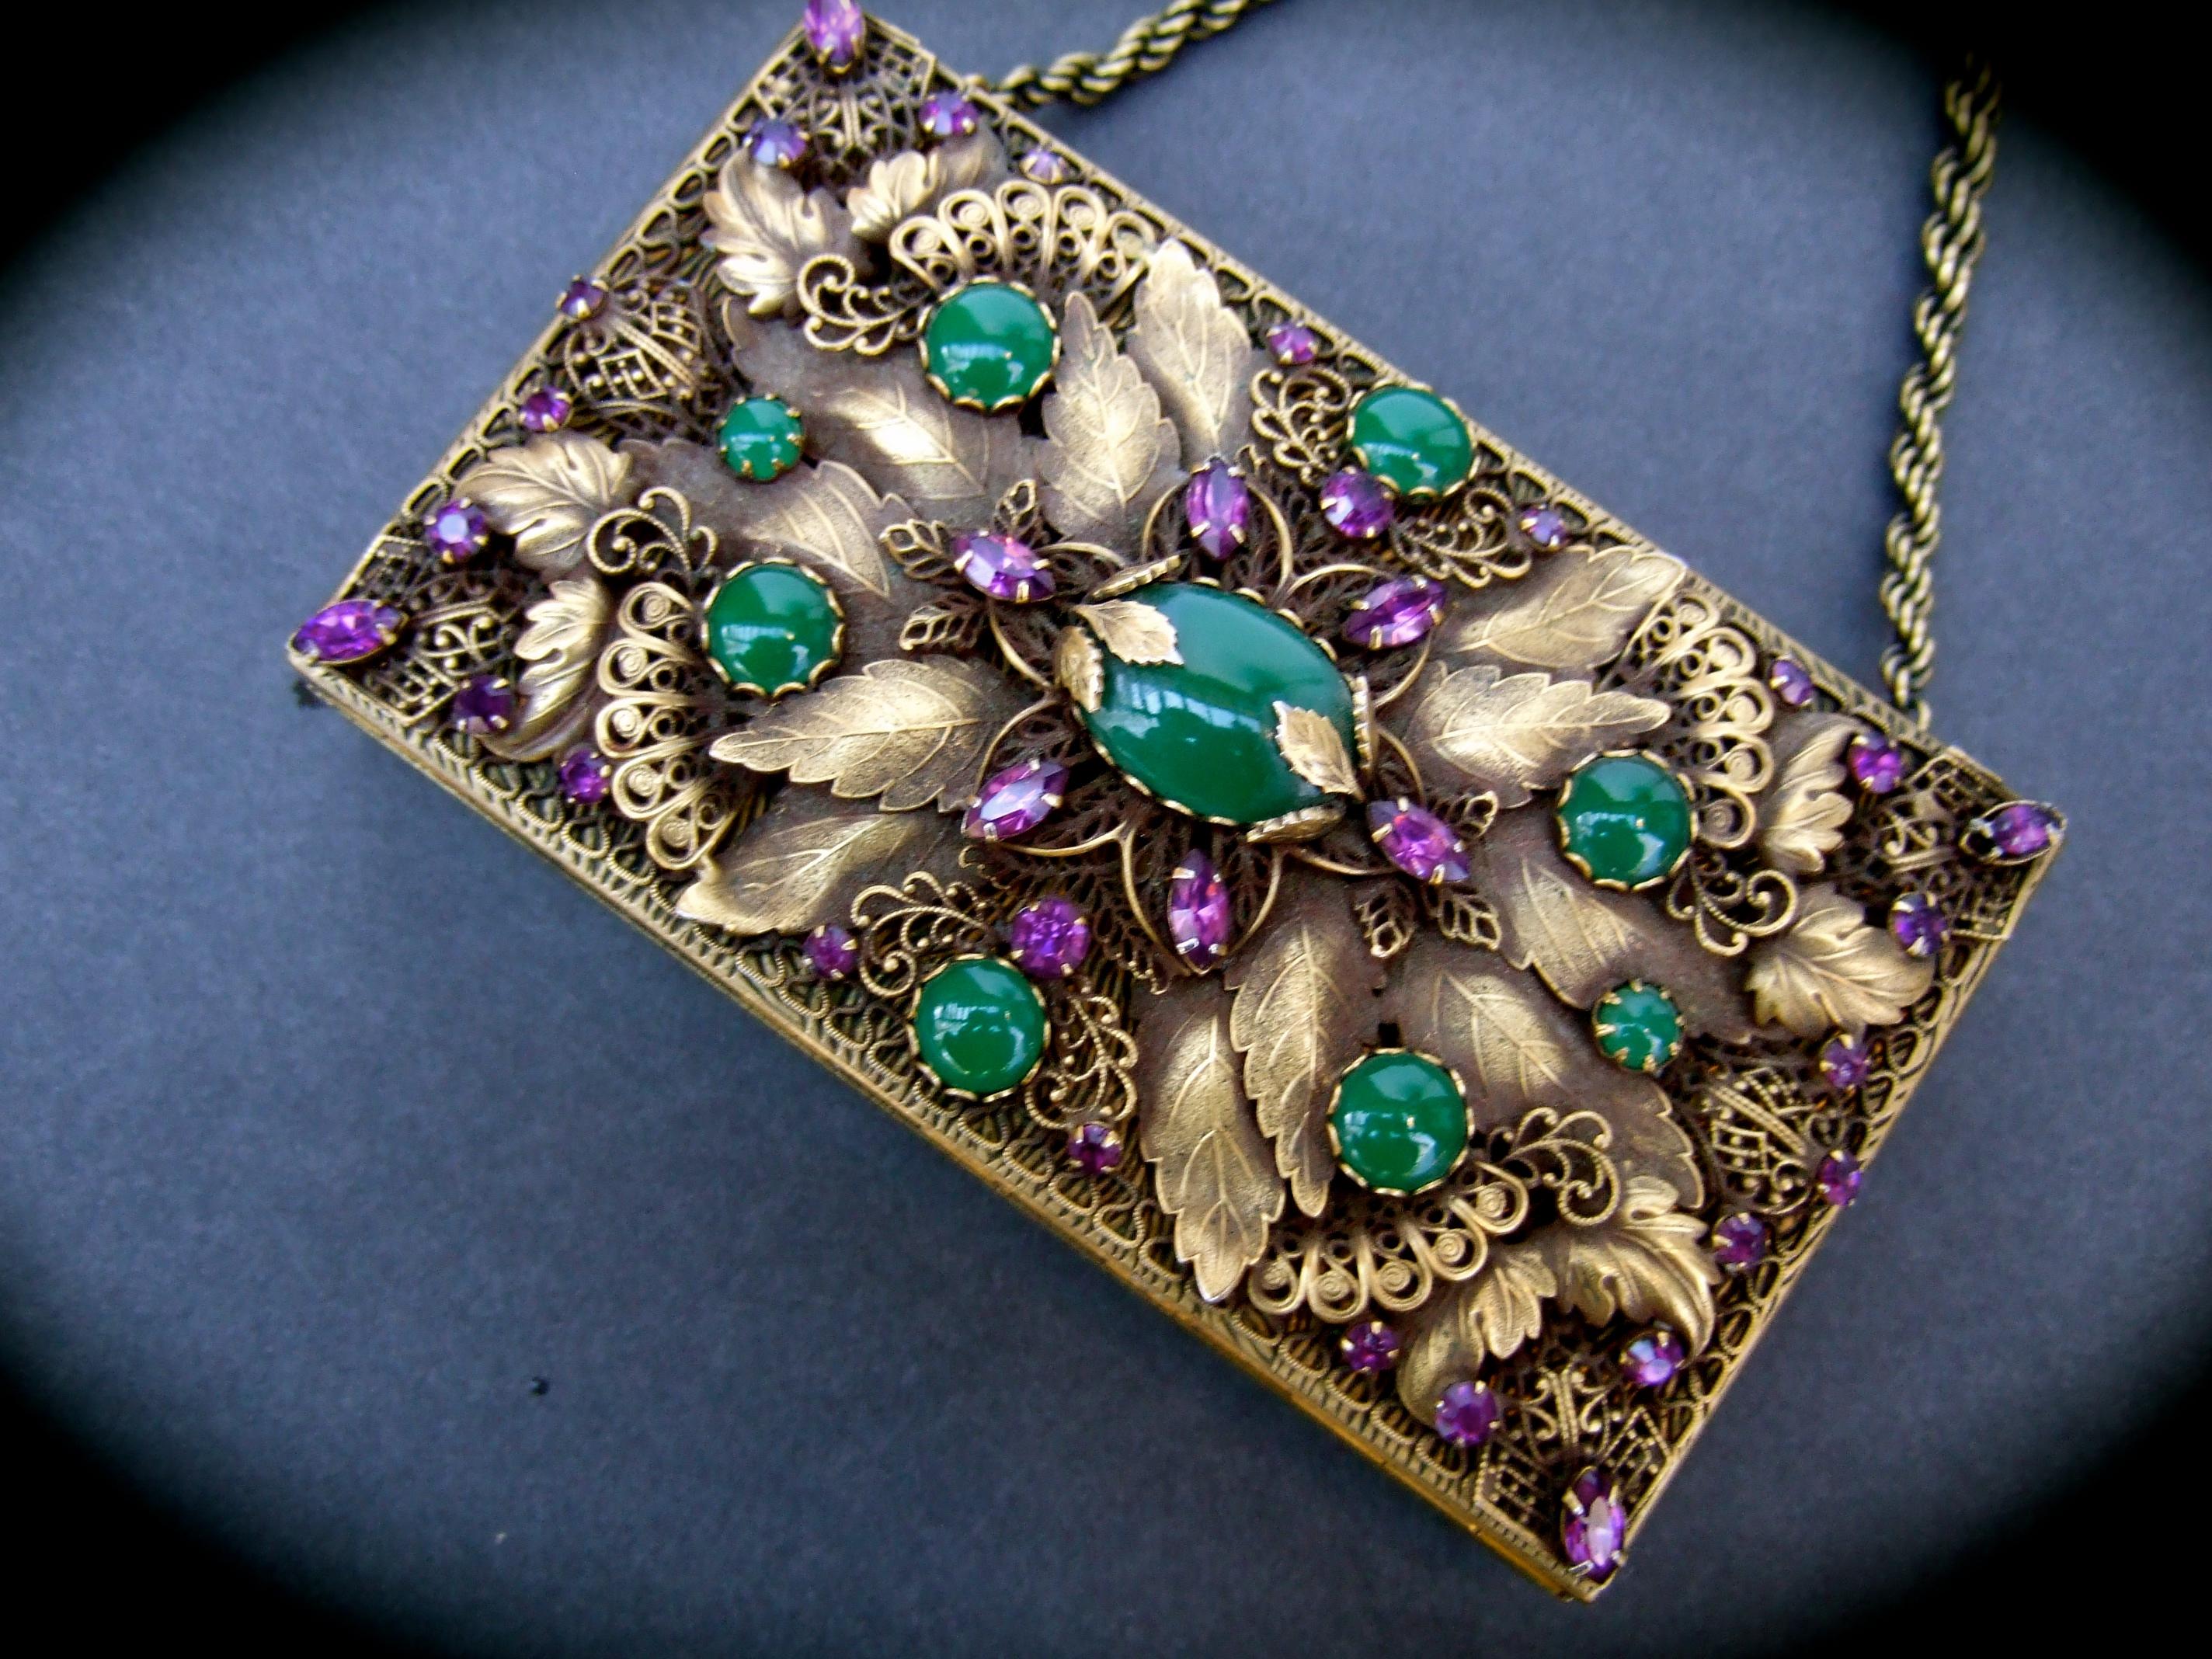 Opulent Jeweled Brass Metal Filigree Evening Bag - Compact Case by Evans c 1950s 1